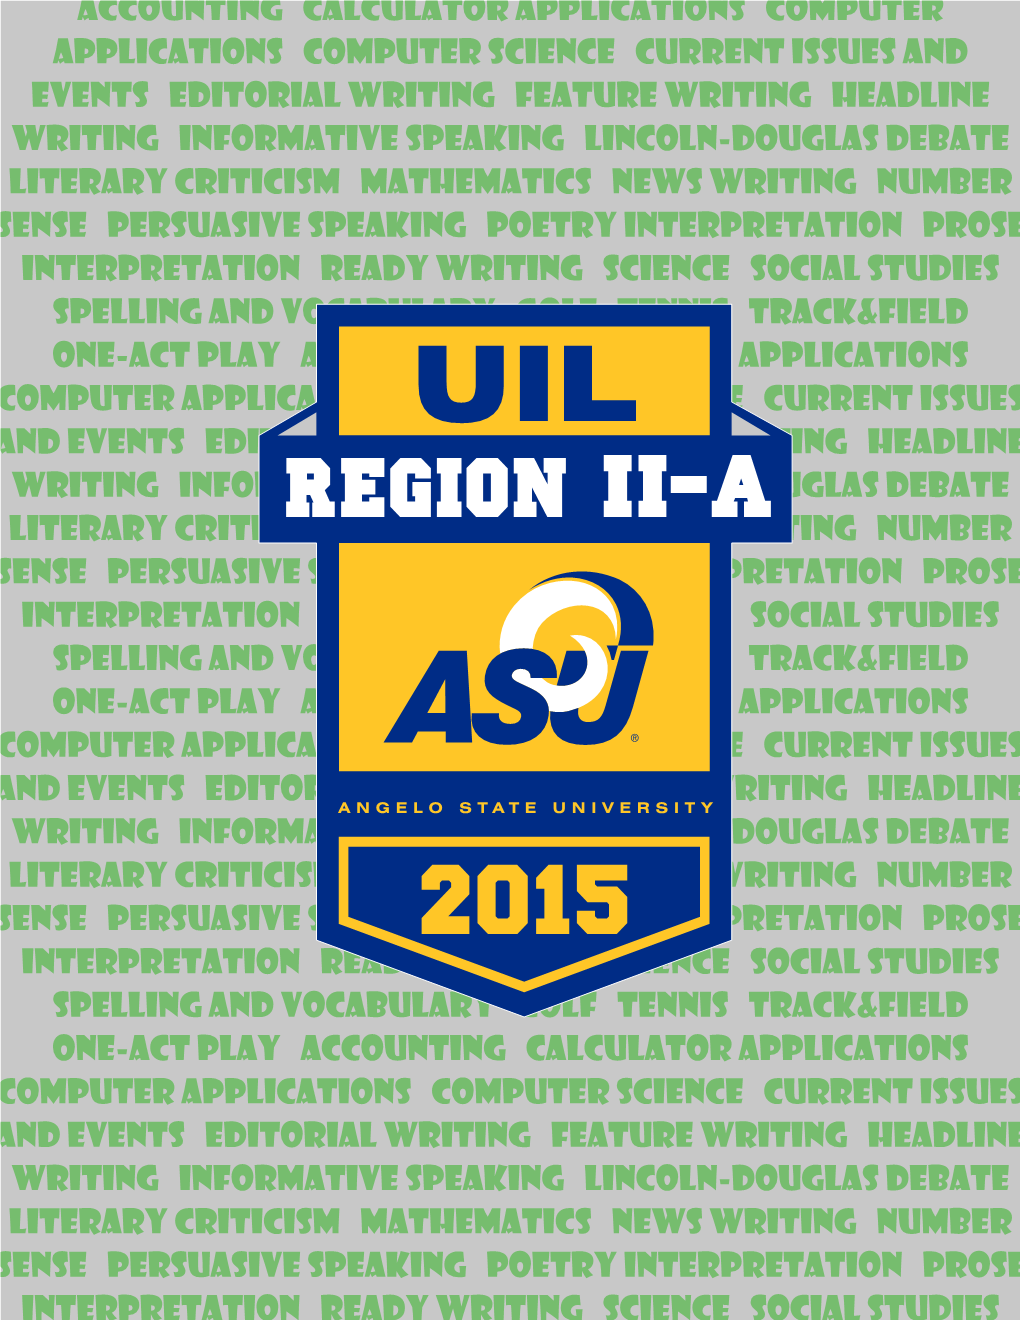 2014-2015 UIL Constitution and Contest Rules